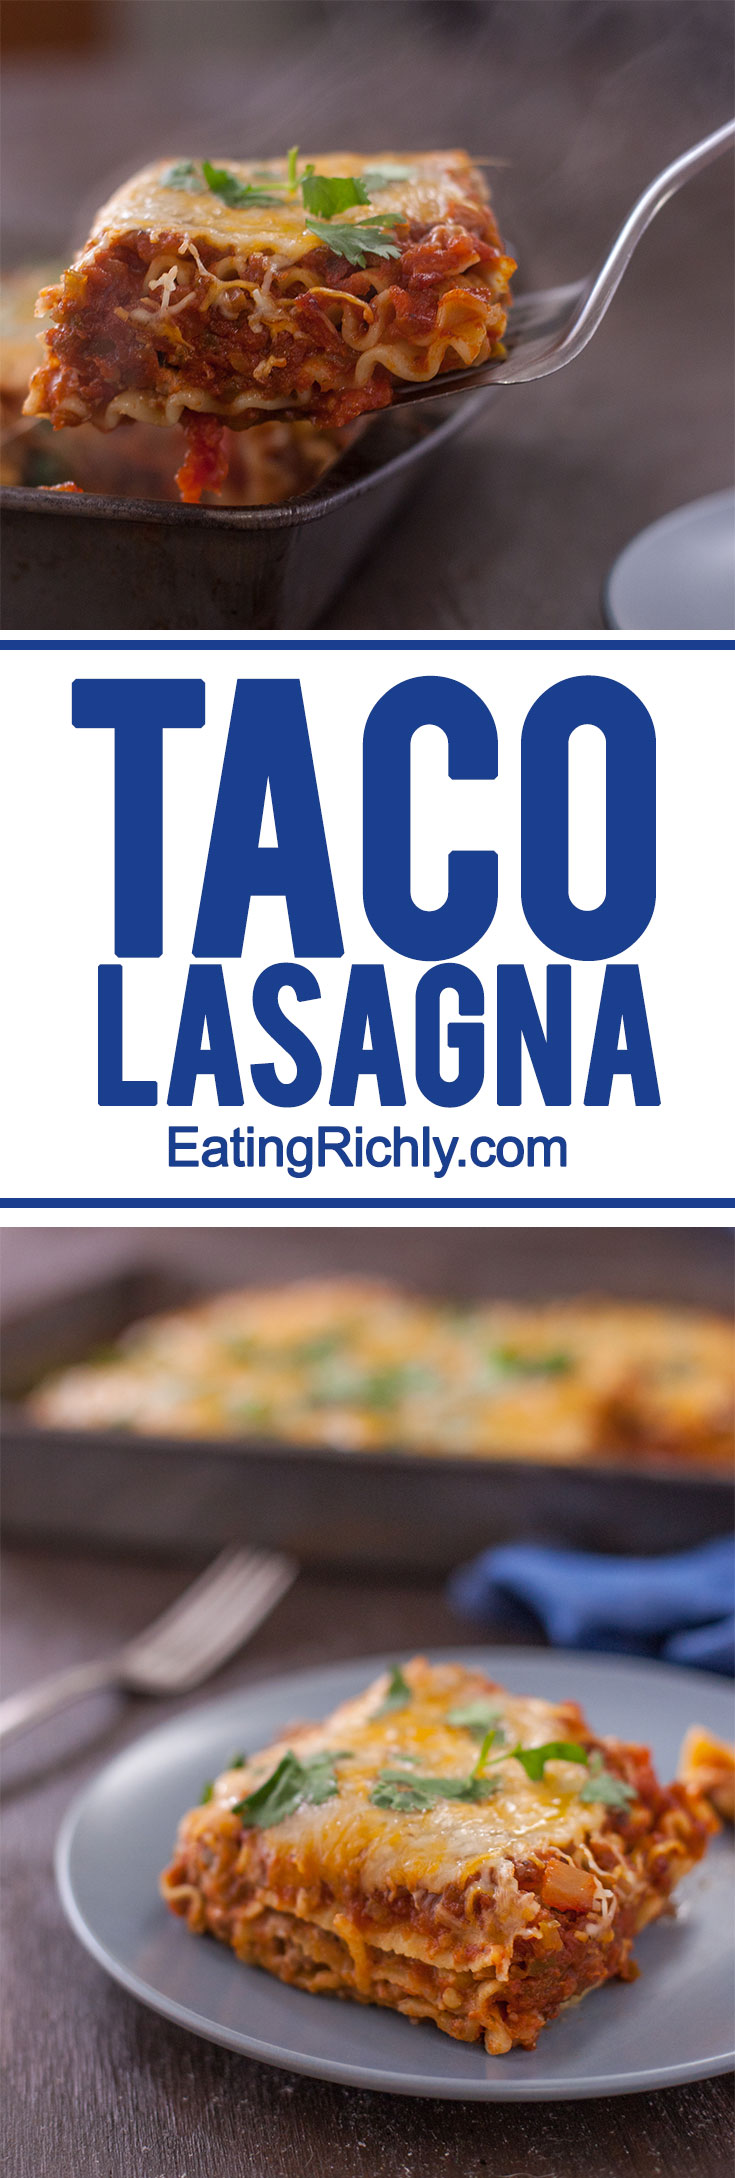 This Easy Taco Lasagna recipe comes together quickly and blends two favorite flavors into one exciting dinner.  It's the best of both worlds!